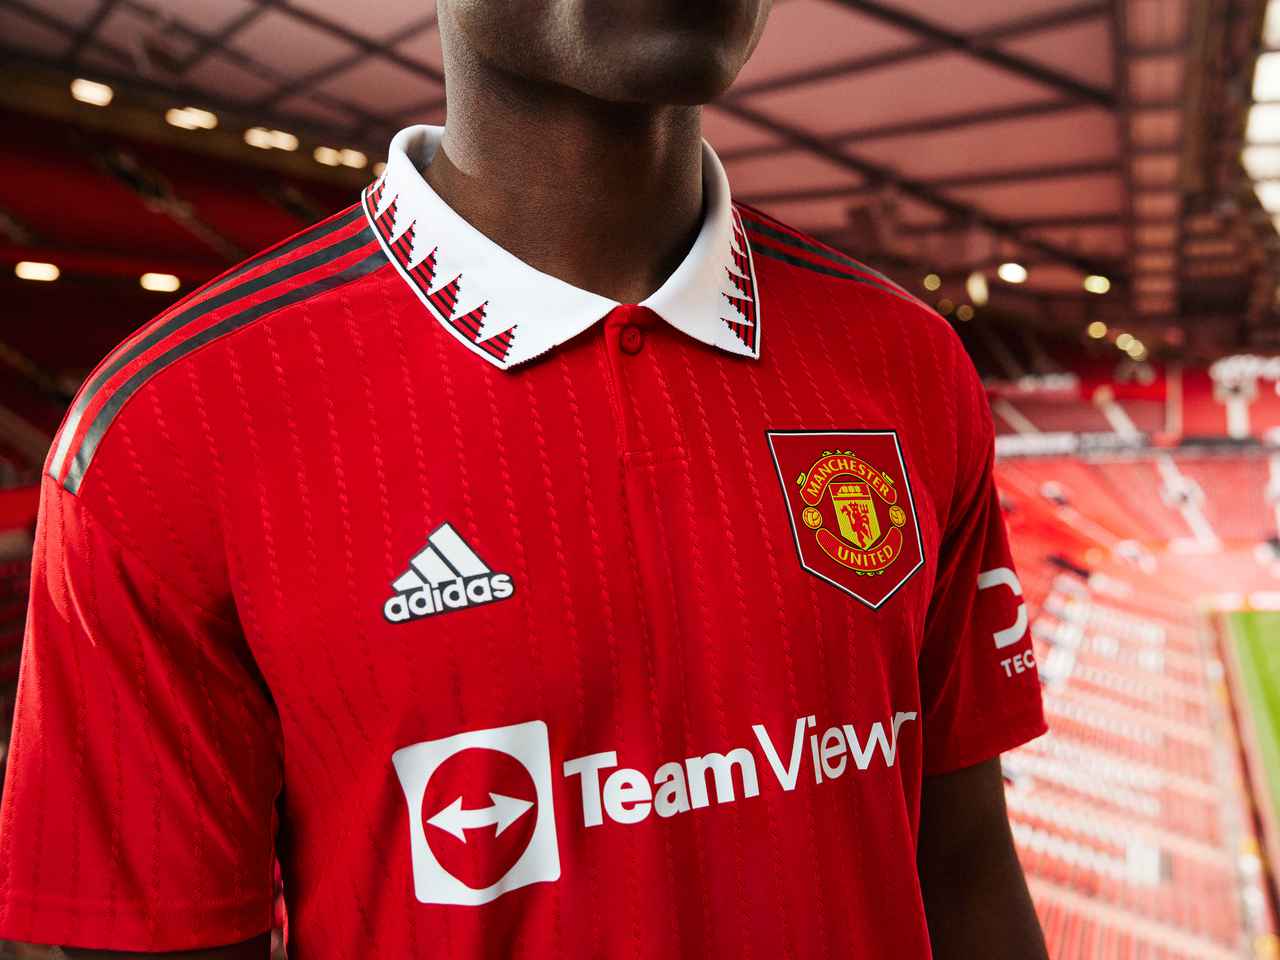 Manchester United 2022/23 Season Home Kit Authentic Adidas On-Field Player Version Soccer Jersey - Red (CUSTOM)